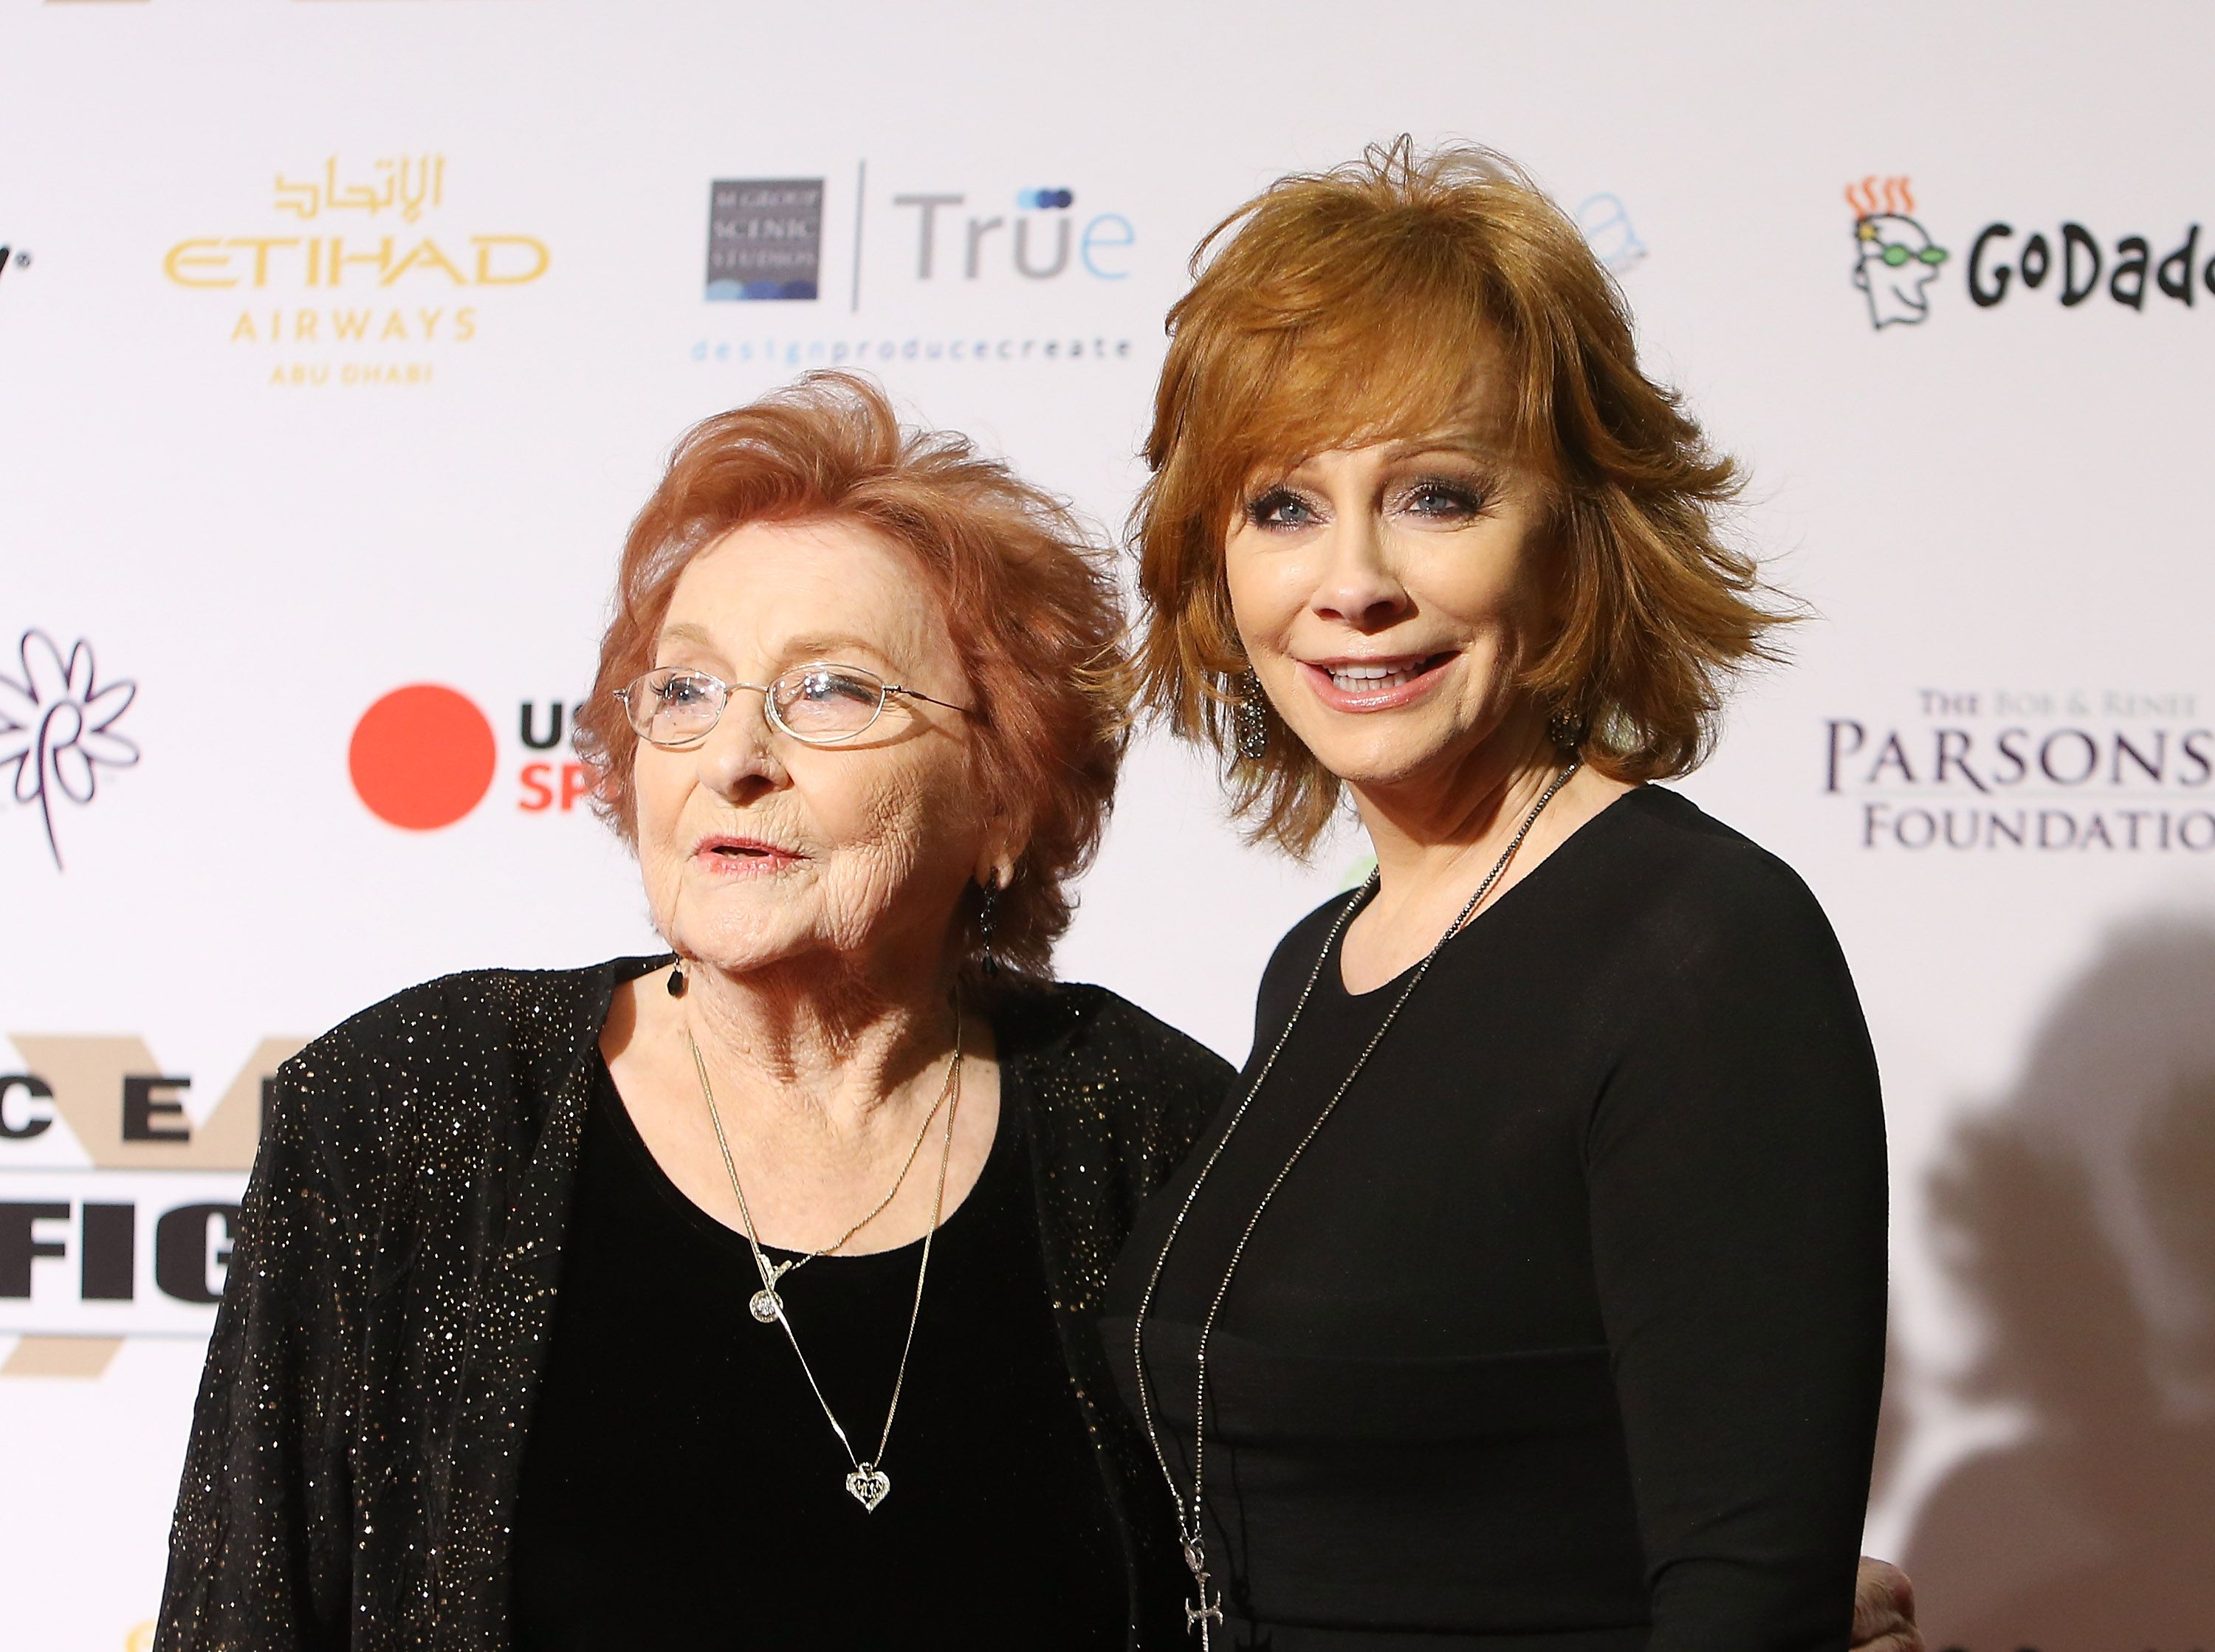 Jacqueline and Reba McEntire at Muhammad Ali's 22nd Celebrity Fight Night on April 9, 2016, in Phoenix, Arizona | Photo: Getty Images